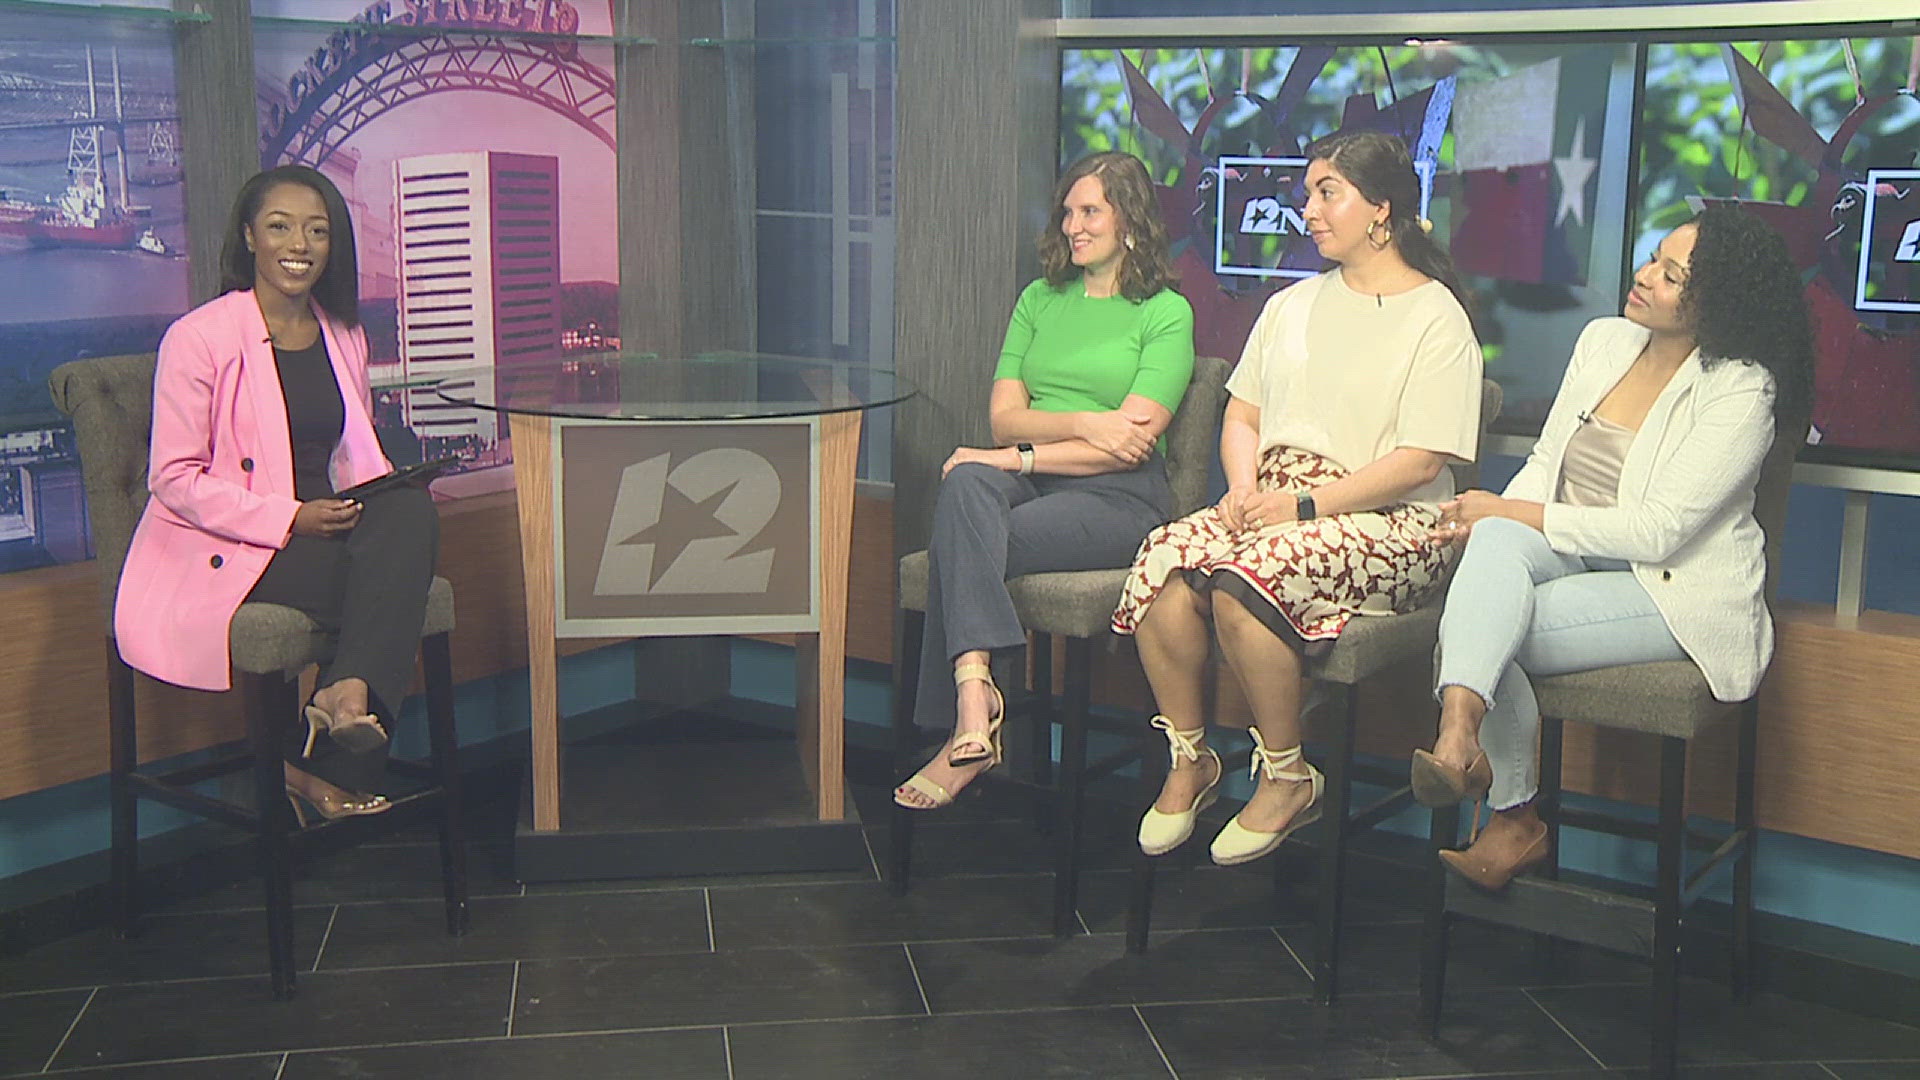 Danielle Sutton, Tracy Ramirez, and Juliana Davila join Midday to preview the 2nd annual celebration at Tyrell Park this weekend.